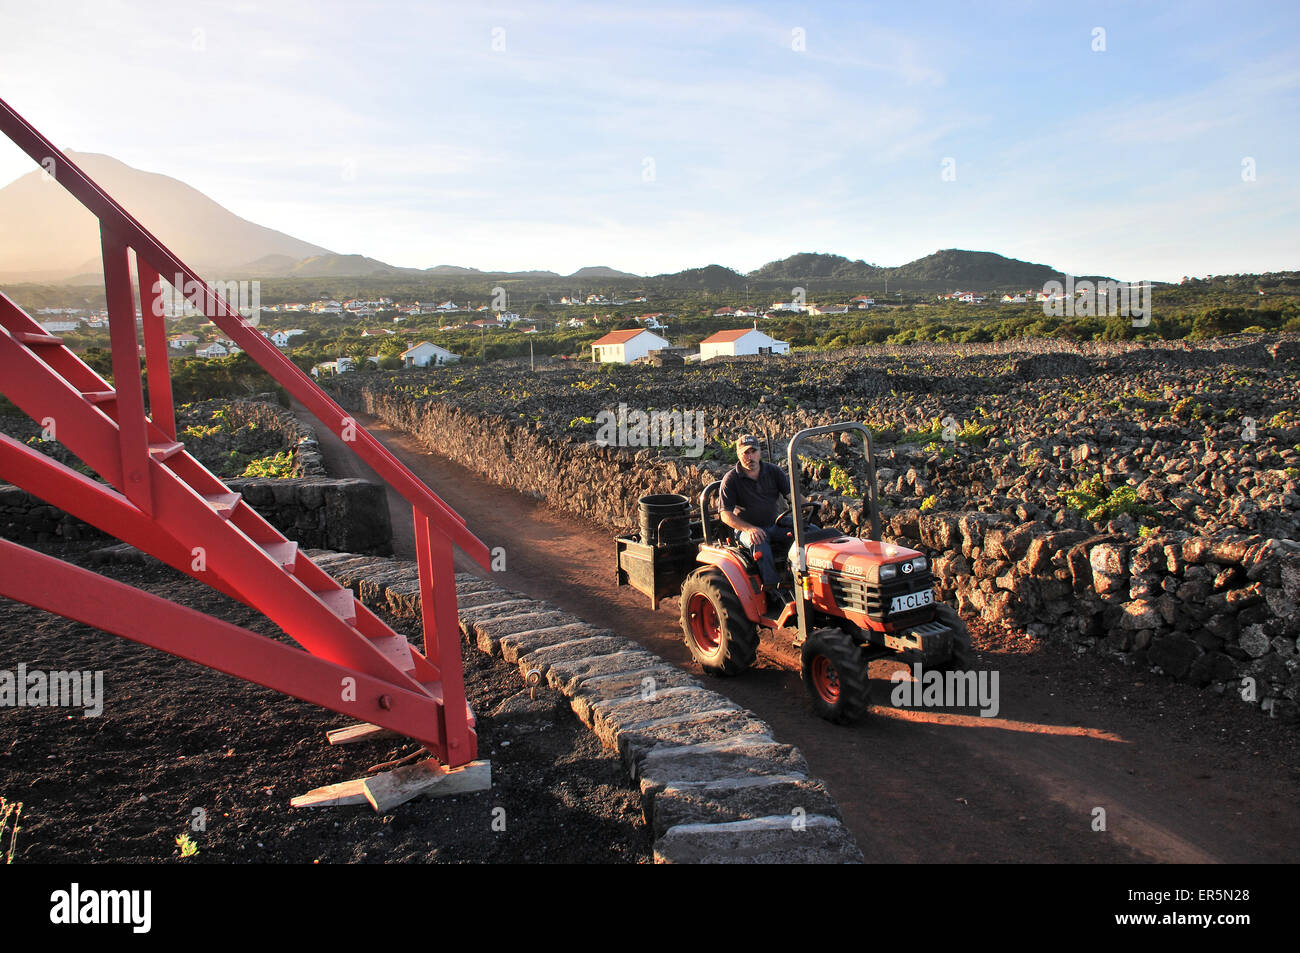 Viniculture along the southwest coast with Pico vulcano in the background, Ponta do Pico, Island of Pico, Azores, Portugal Stock Photo